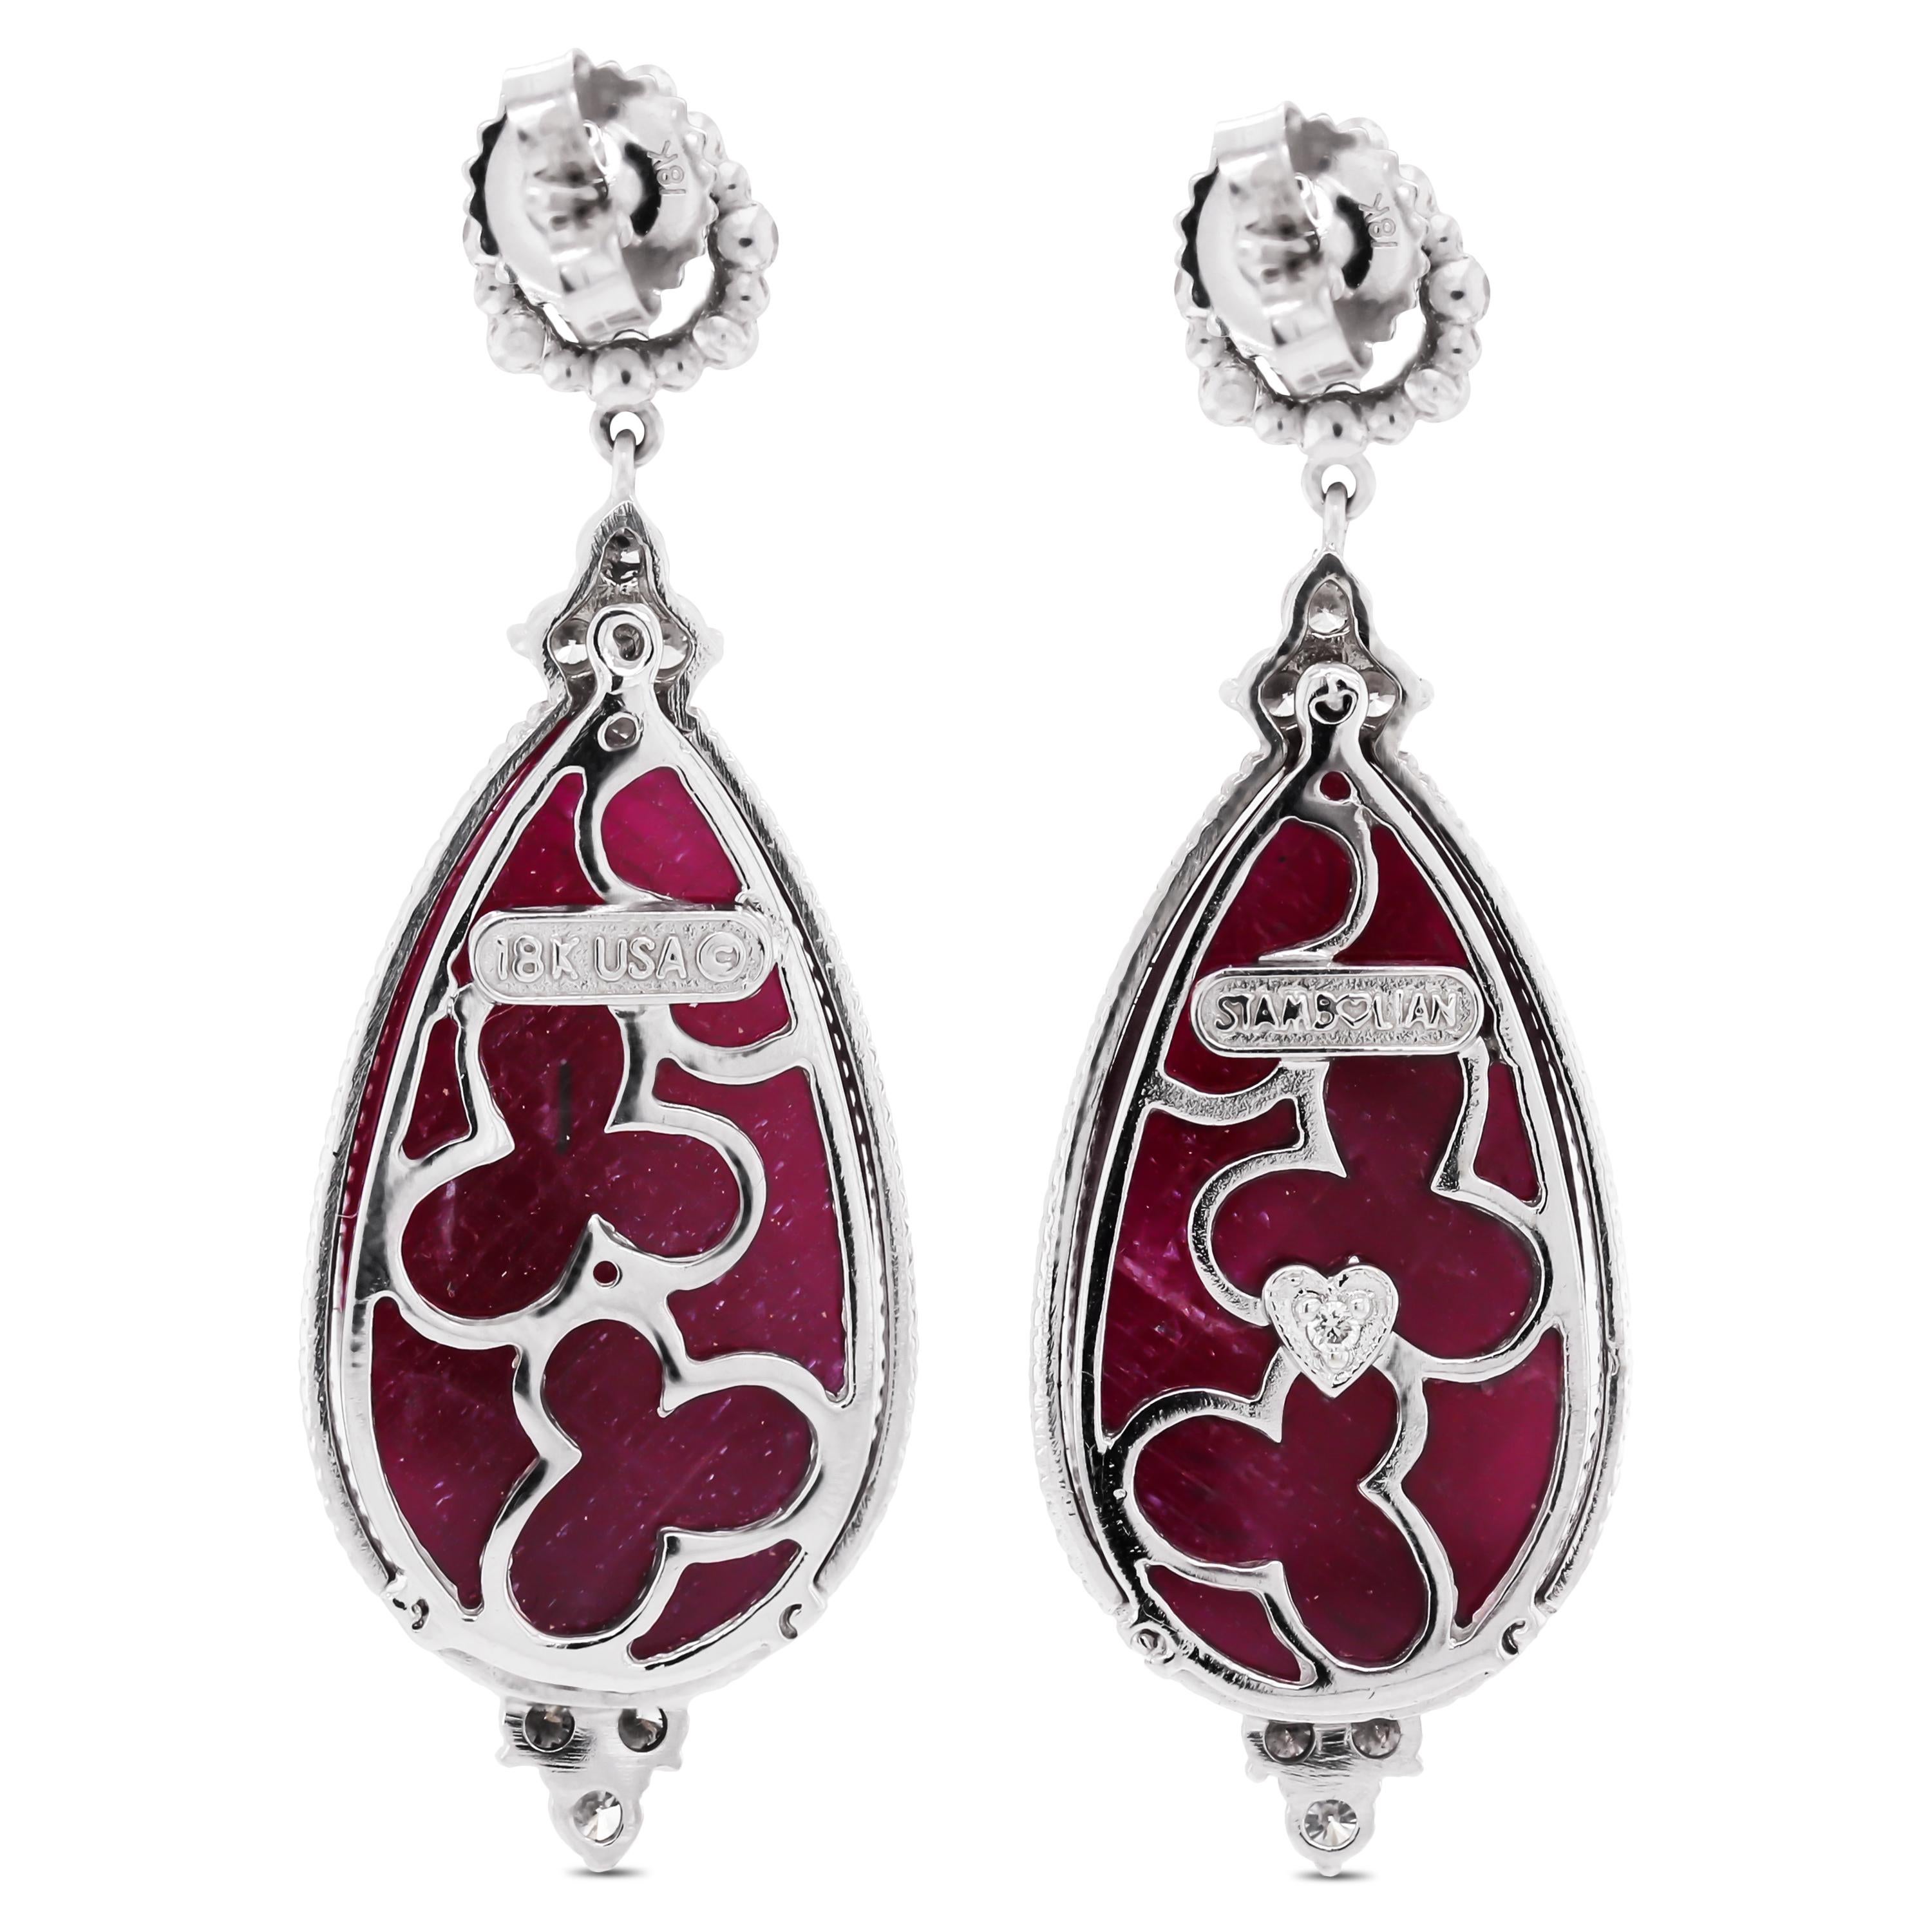 18K White Gold and Diamond Drop Earrings with Sliced Rubies by Stambolian

This pair of earrings showcases two pear shape sliced rubies in the center with a checkered cut design. 

Apprx. 38 carat Ruby total weight
1.65 carat G color, VS clarity